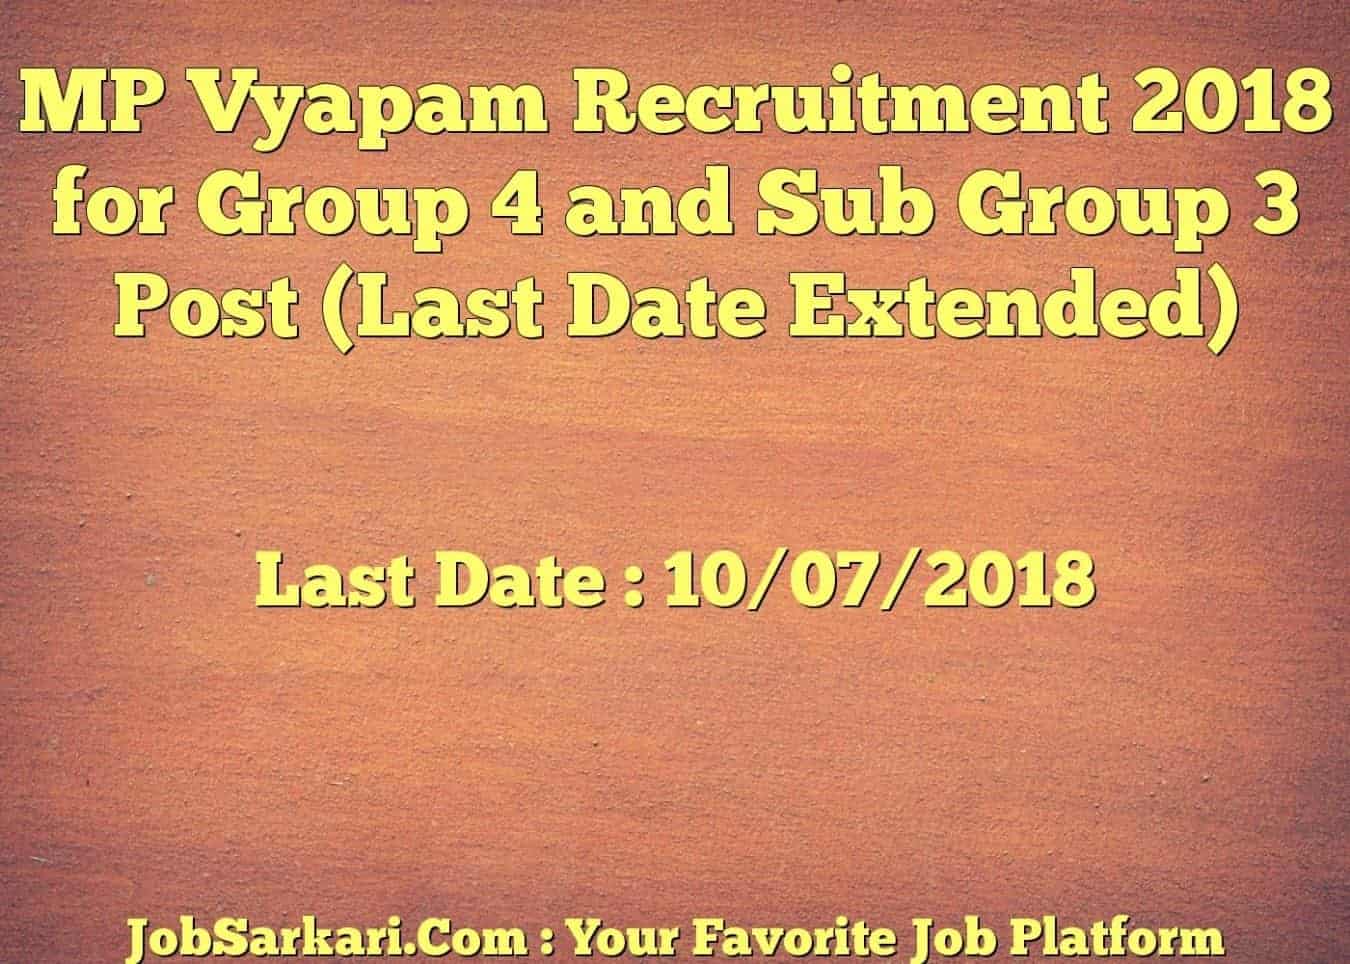 MP Vyapam Recruitment 2018 for Group 4 and Sub Group 3 Post (Last Date Extended)